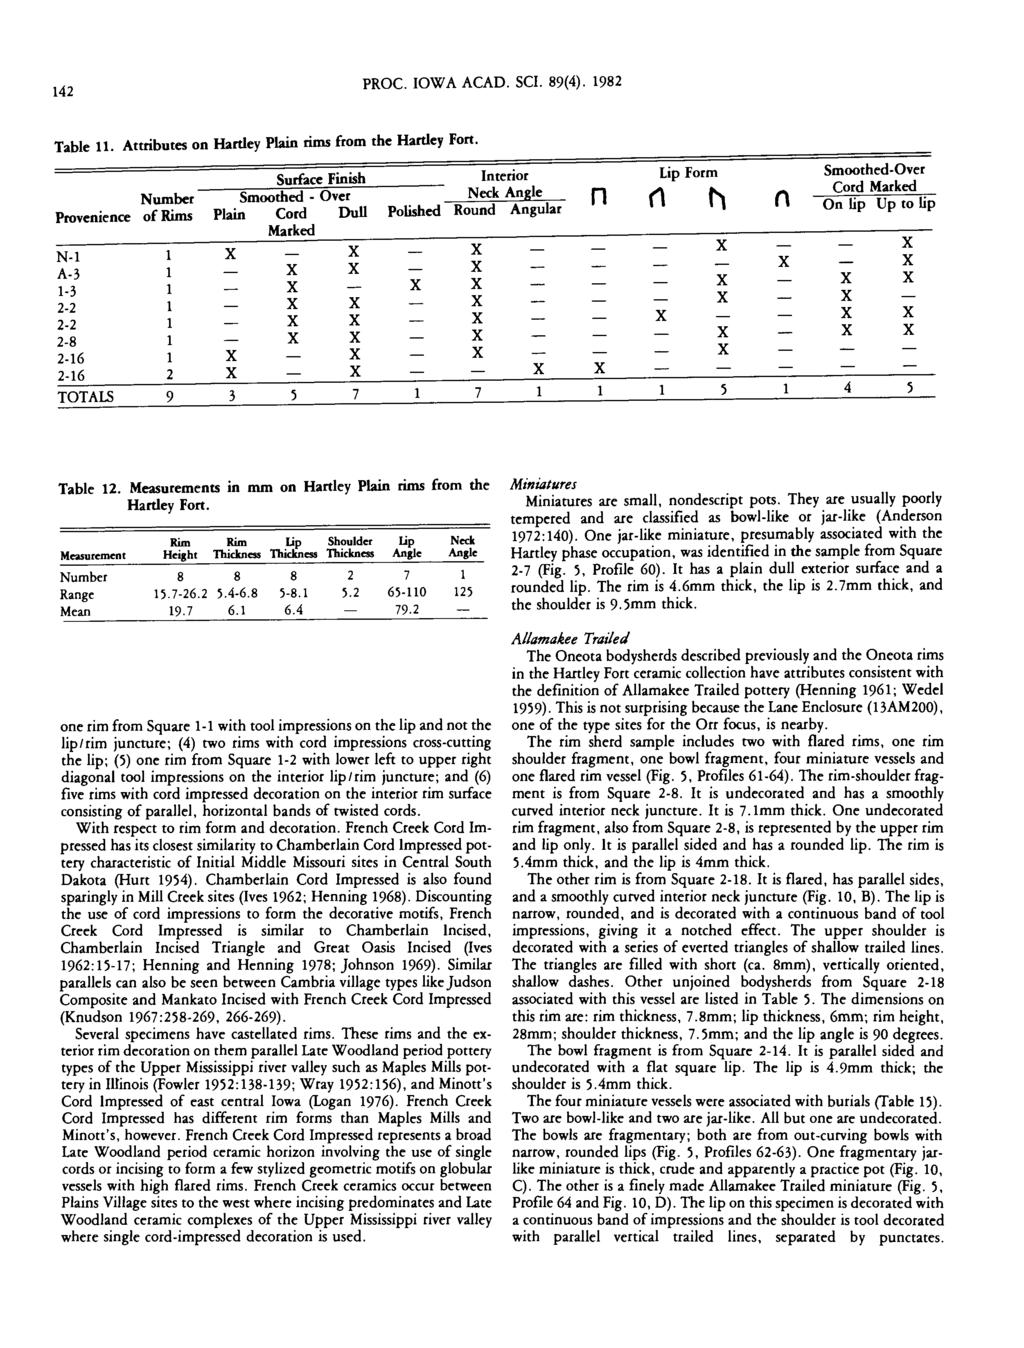 Proceedings of the Iowa Academy of Science, Vol. 89 [1982], No. 4, Art. 3 142 PROC. IOWA ACAD. SCI. 89(4). 1982 Table 11. Attributes on Hartley Plain rims from the Hartley Fort.